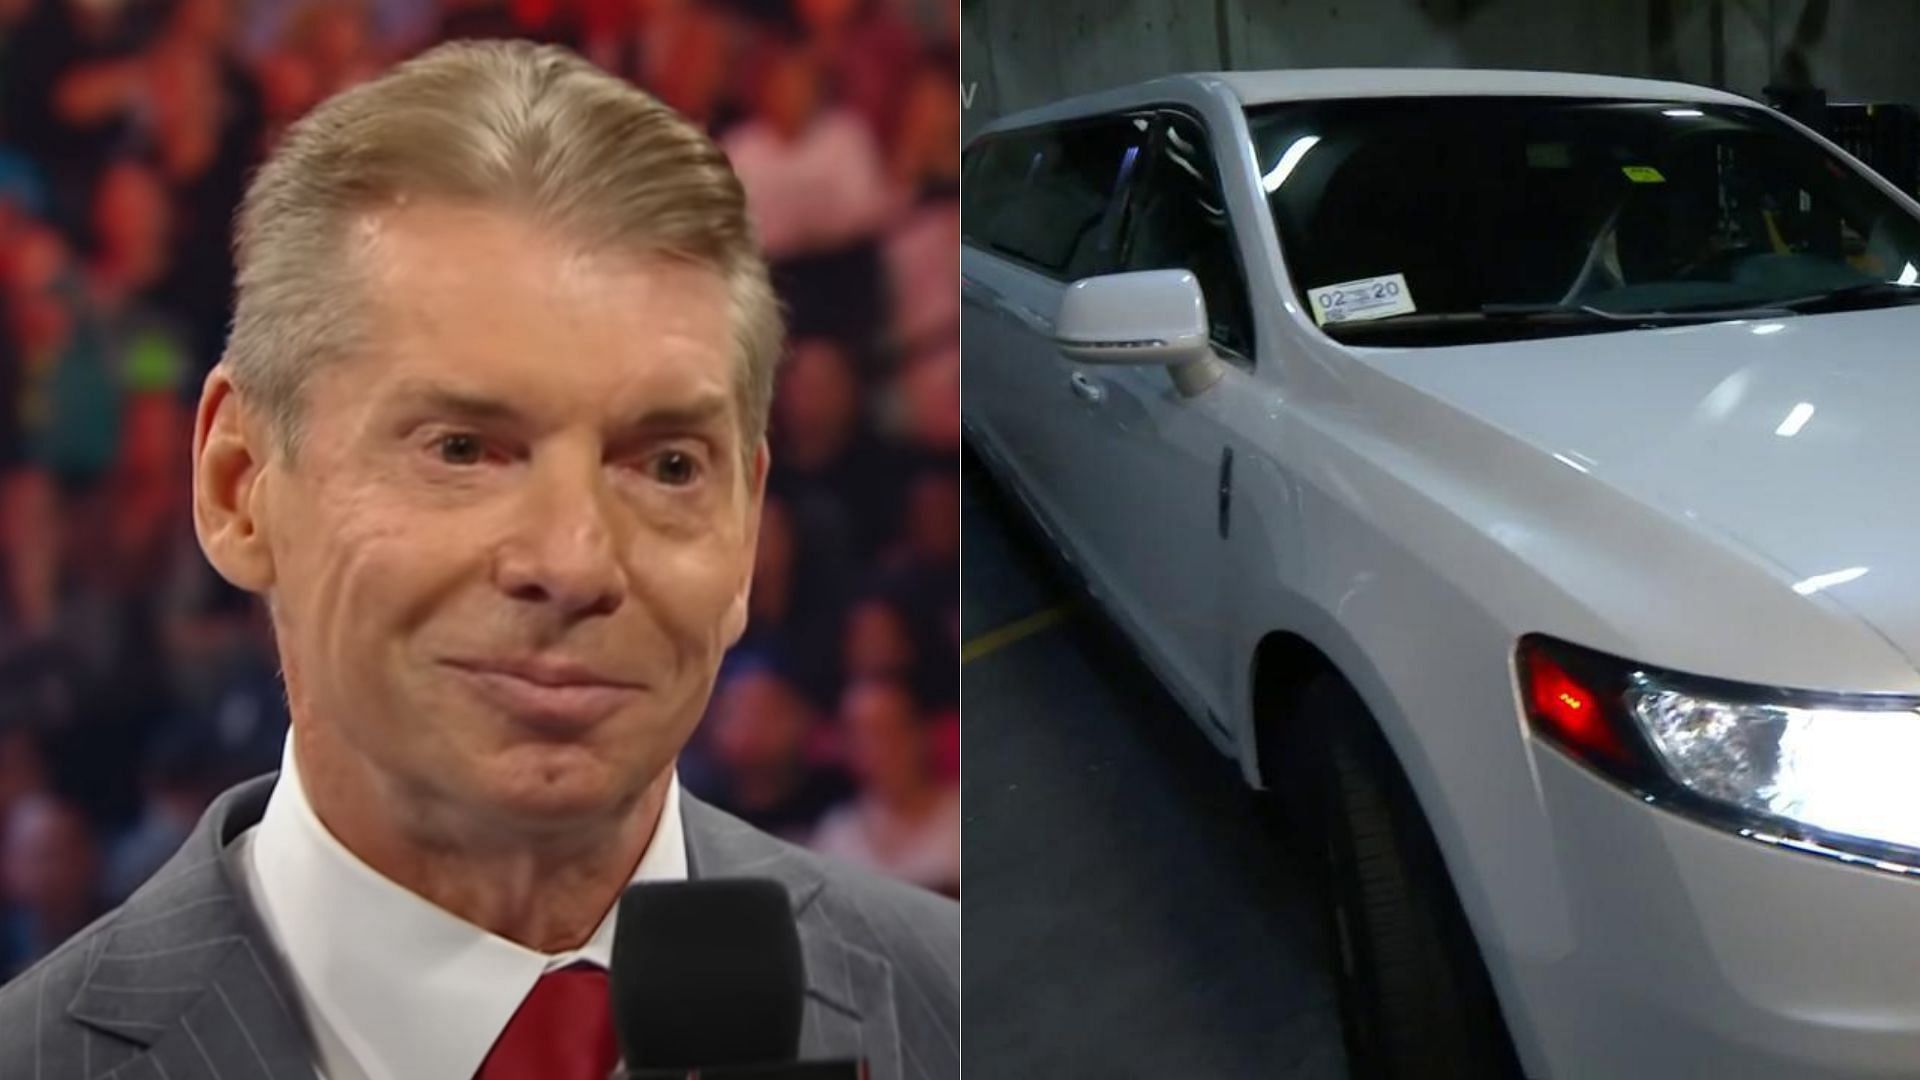 Several limousines appeared on Vince McMahon